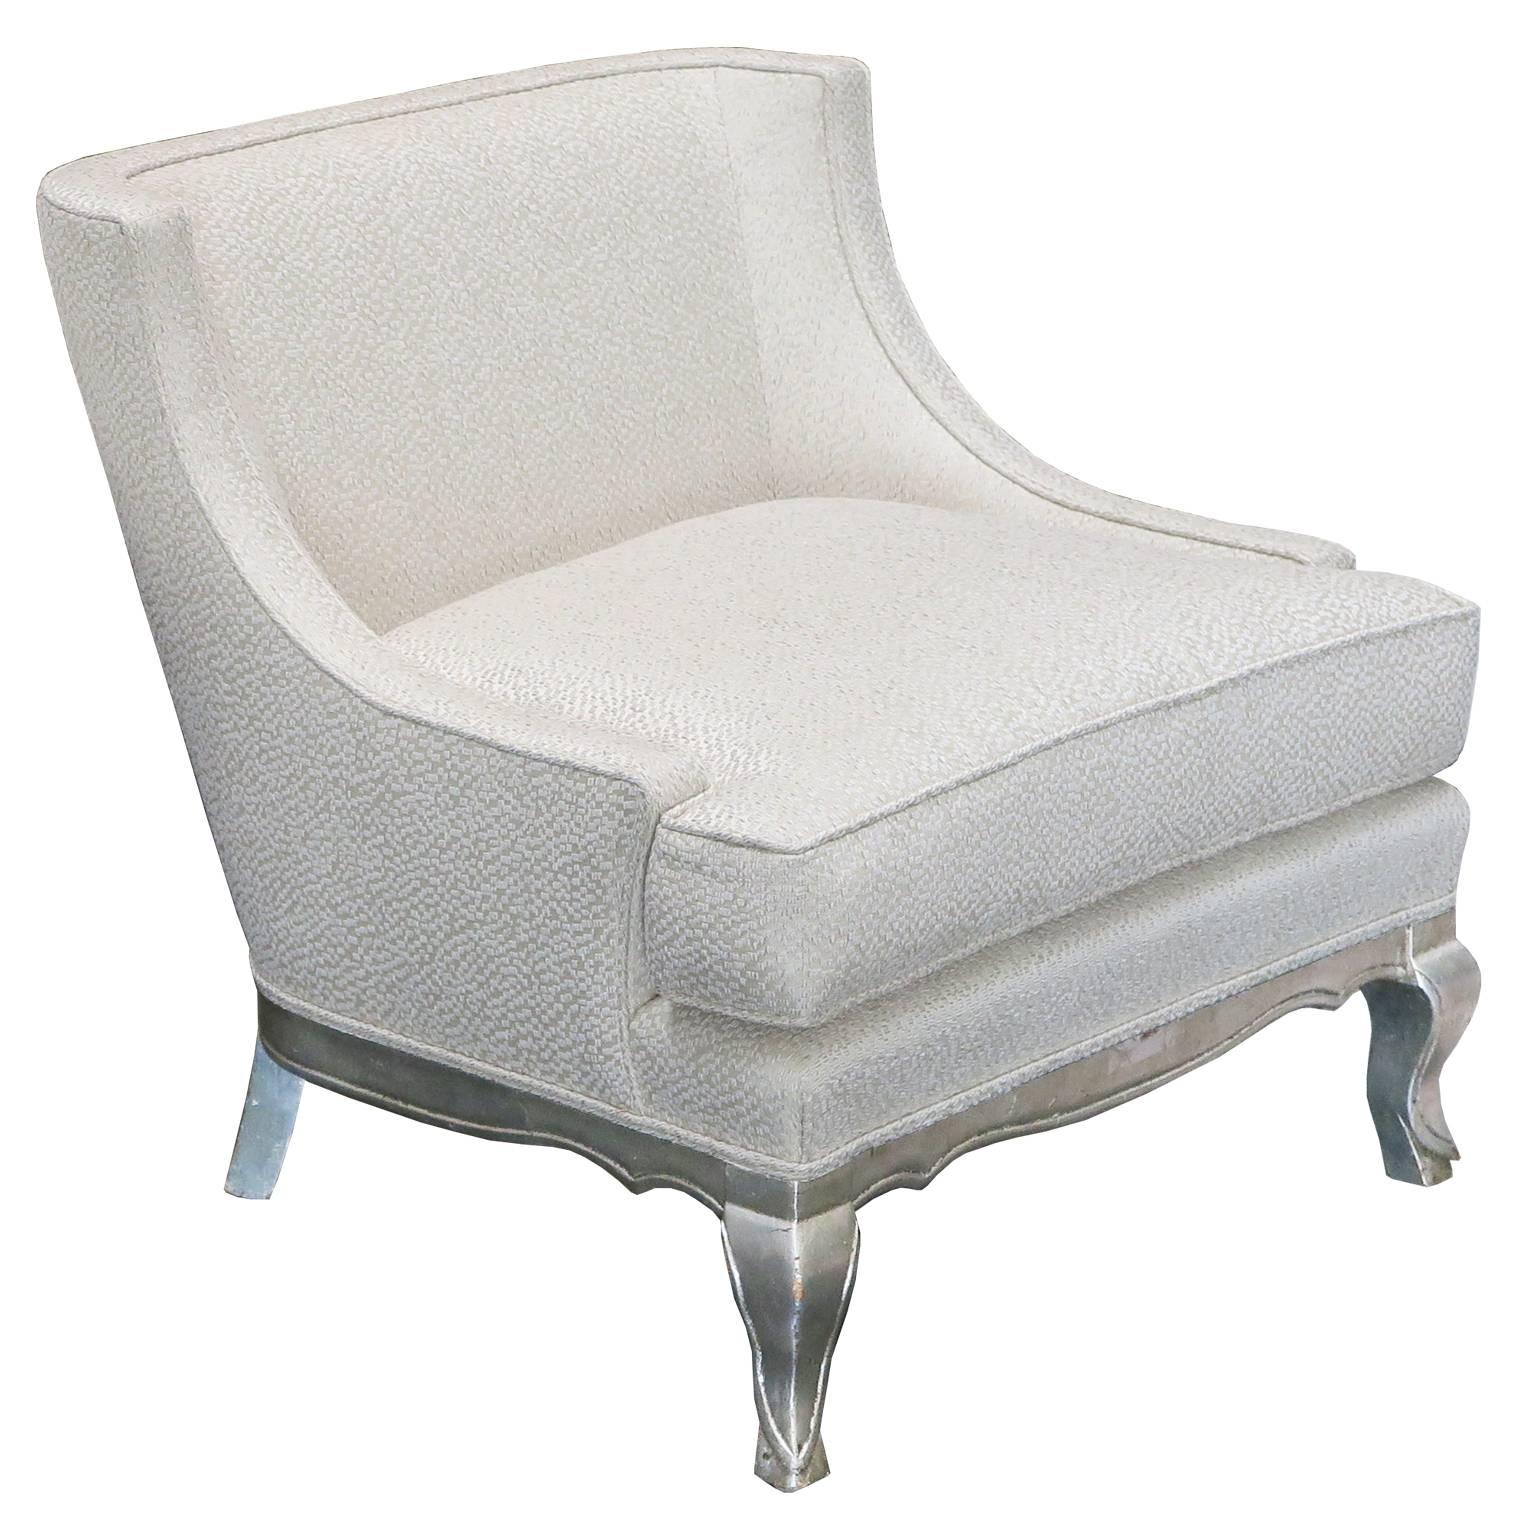 Elegant pair of lounge chairs with carved legs and base in distressed silver leaf. Curved arms with tight back and seat cushion are upholstered in ivory linen and silk fabric.